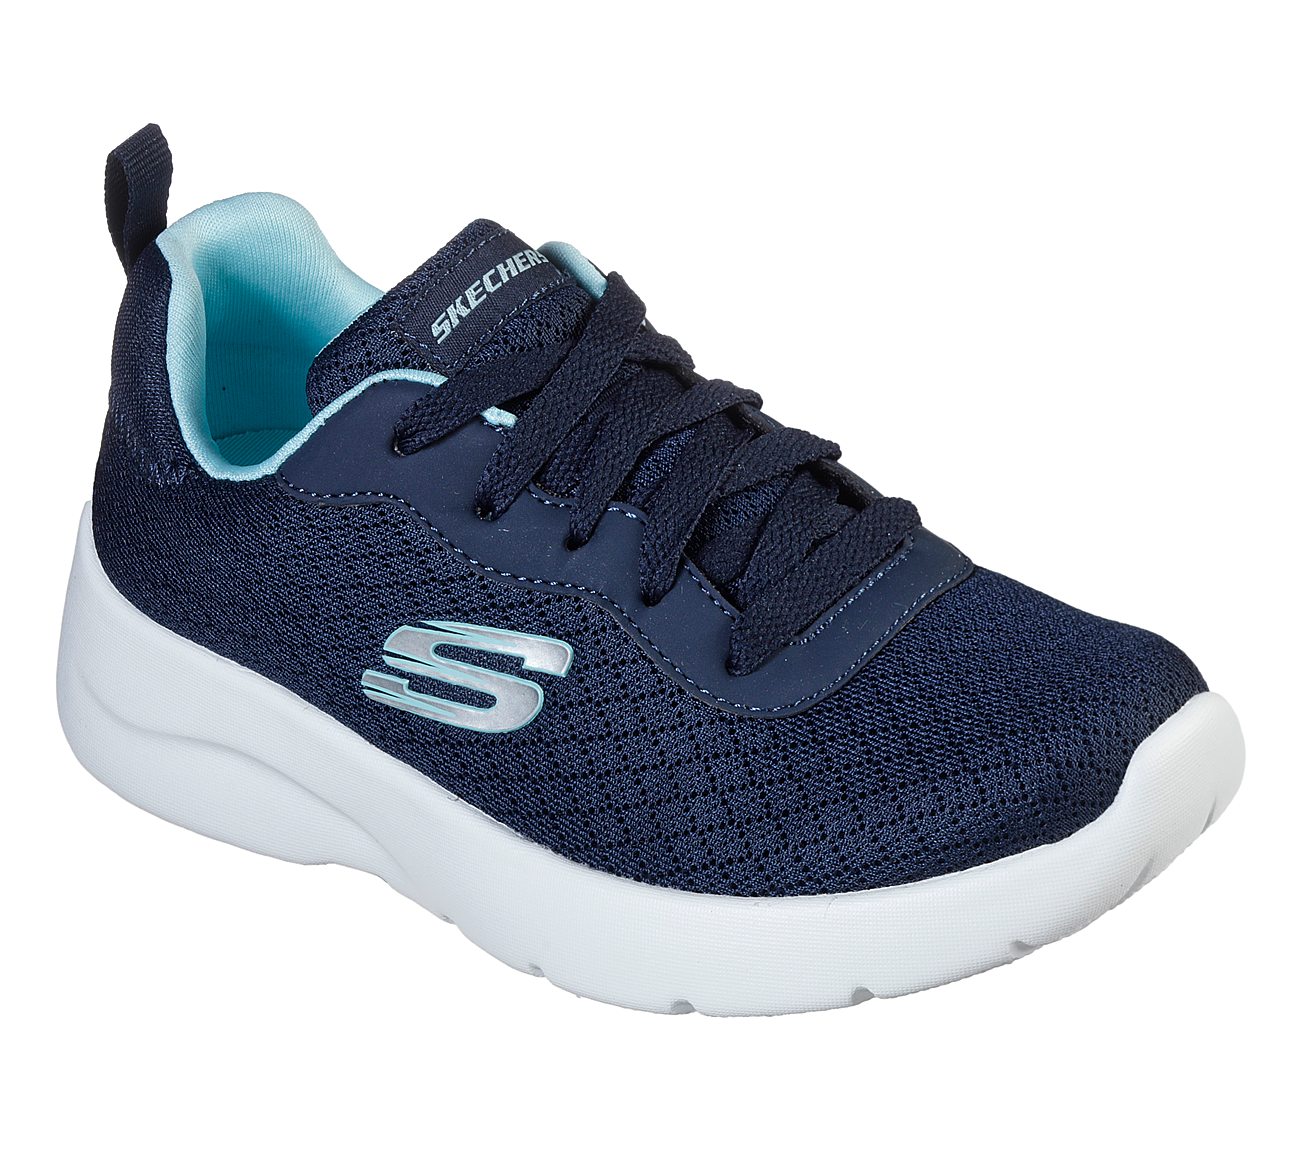 DYNAMIGHT 2.0-EYE TO EYE, NAVY/LIGHT BLUE Footwear Lateral View